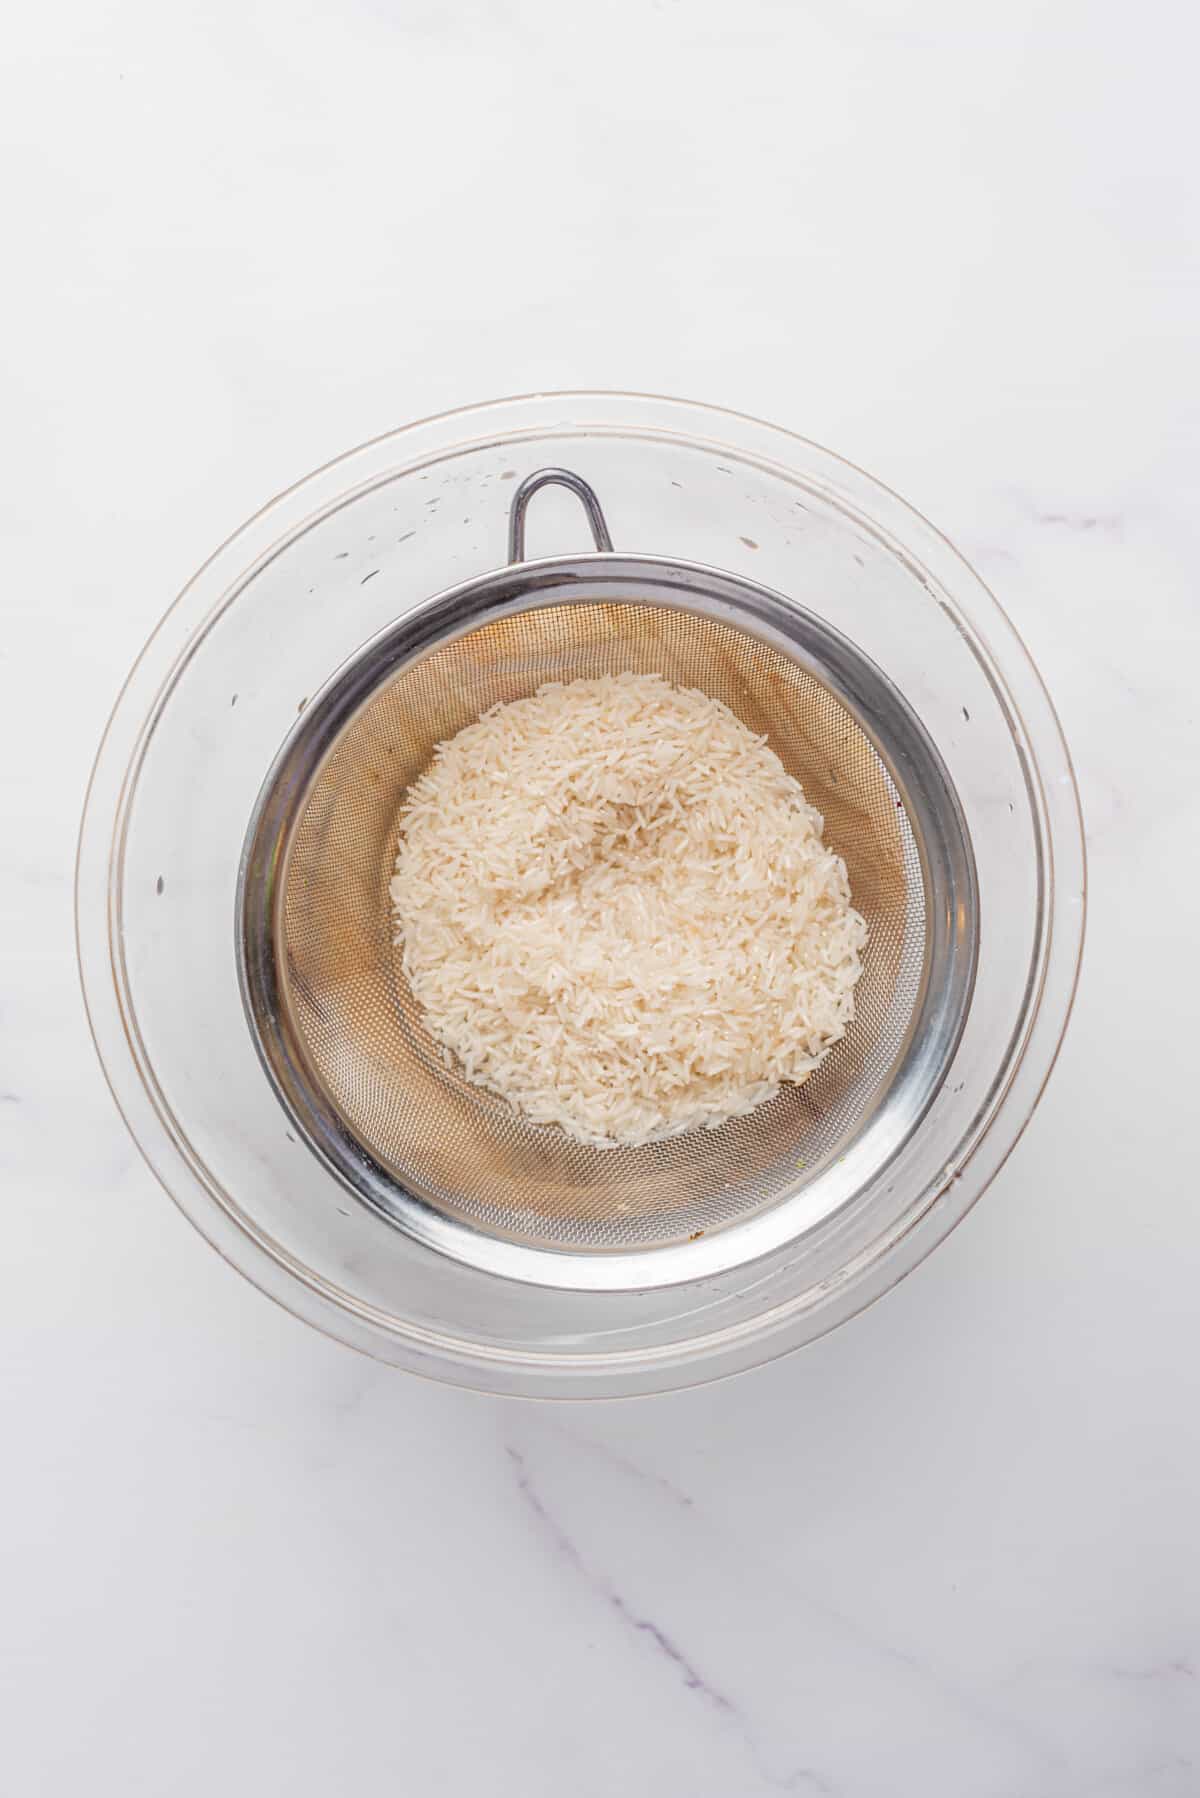 An overhead image of uncooked rice on a fine-mesh strainer inside of a bowl.